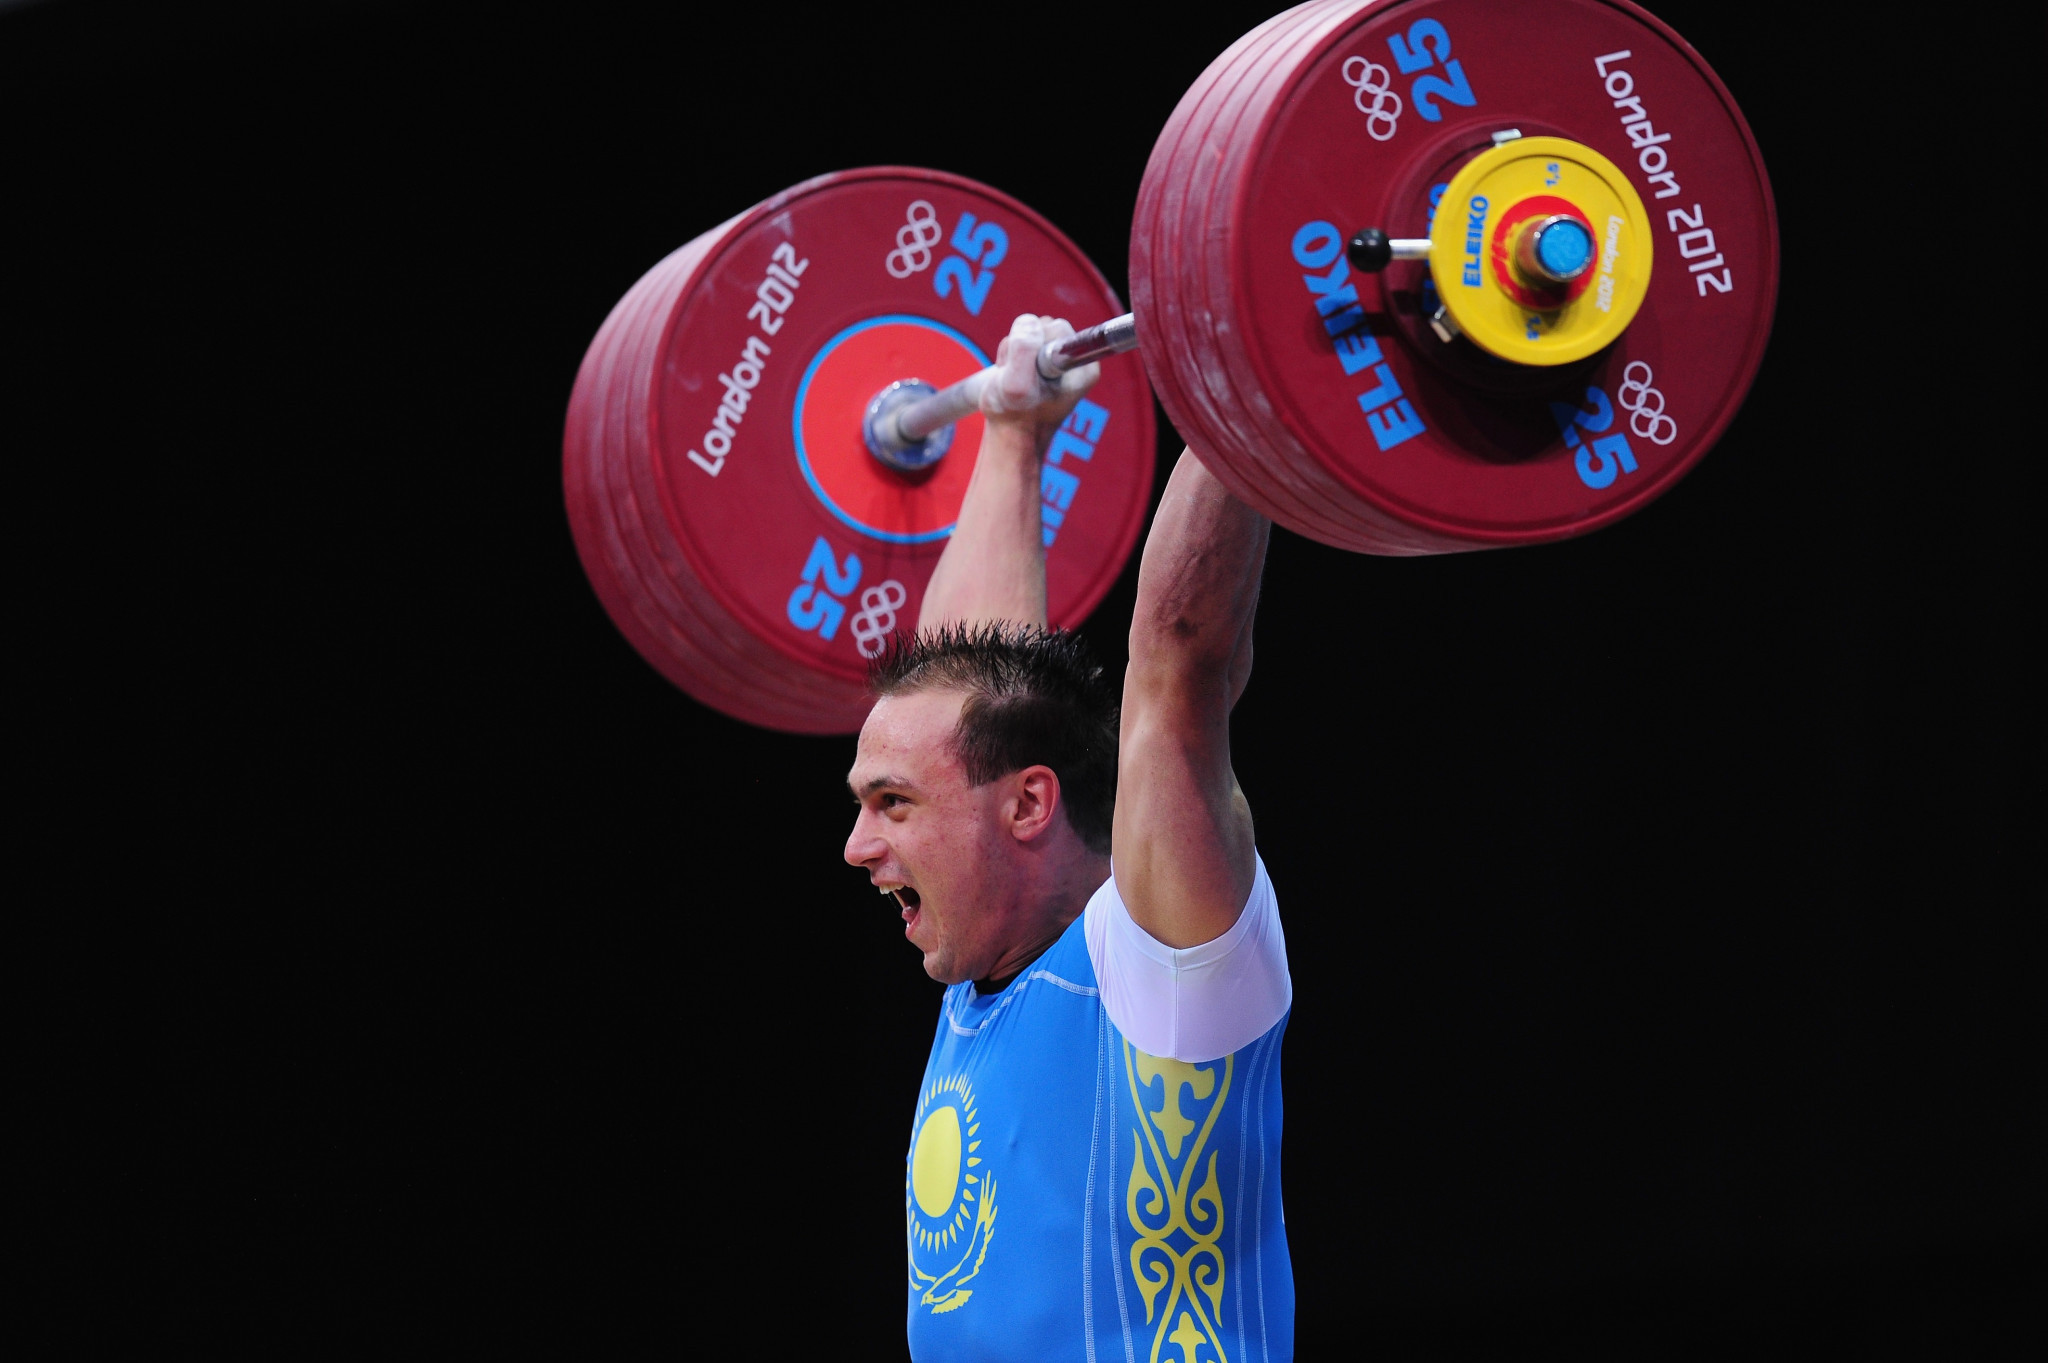 Ilya Ilyin of Kazakhstan was stripped of his two Olympic gold medals ©Getty Images